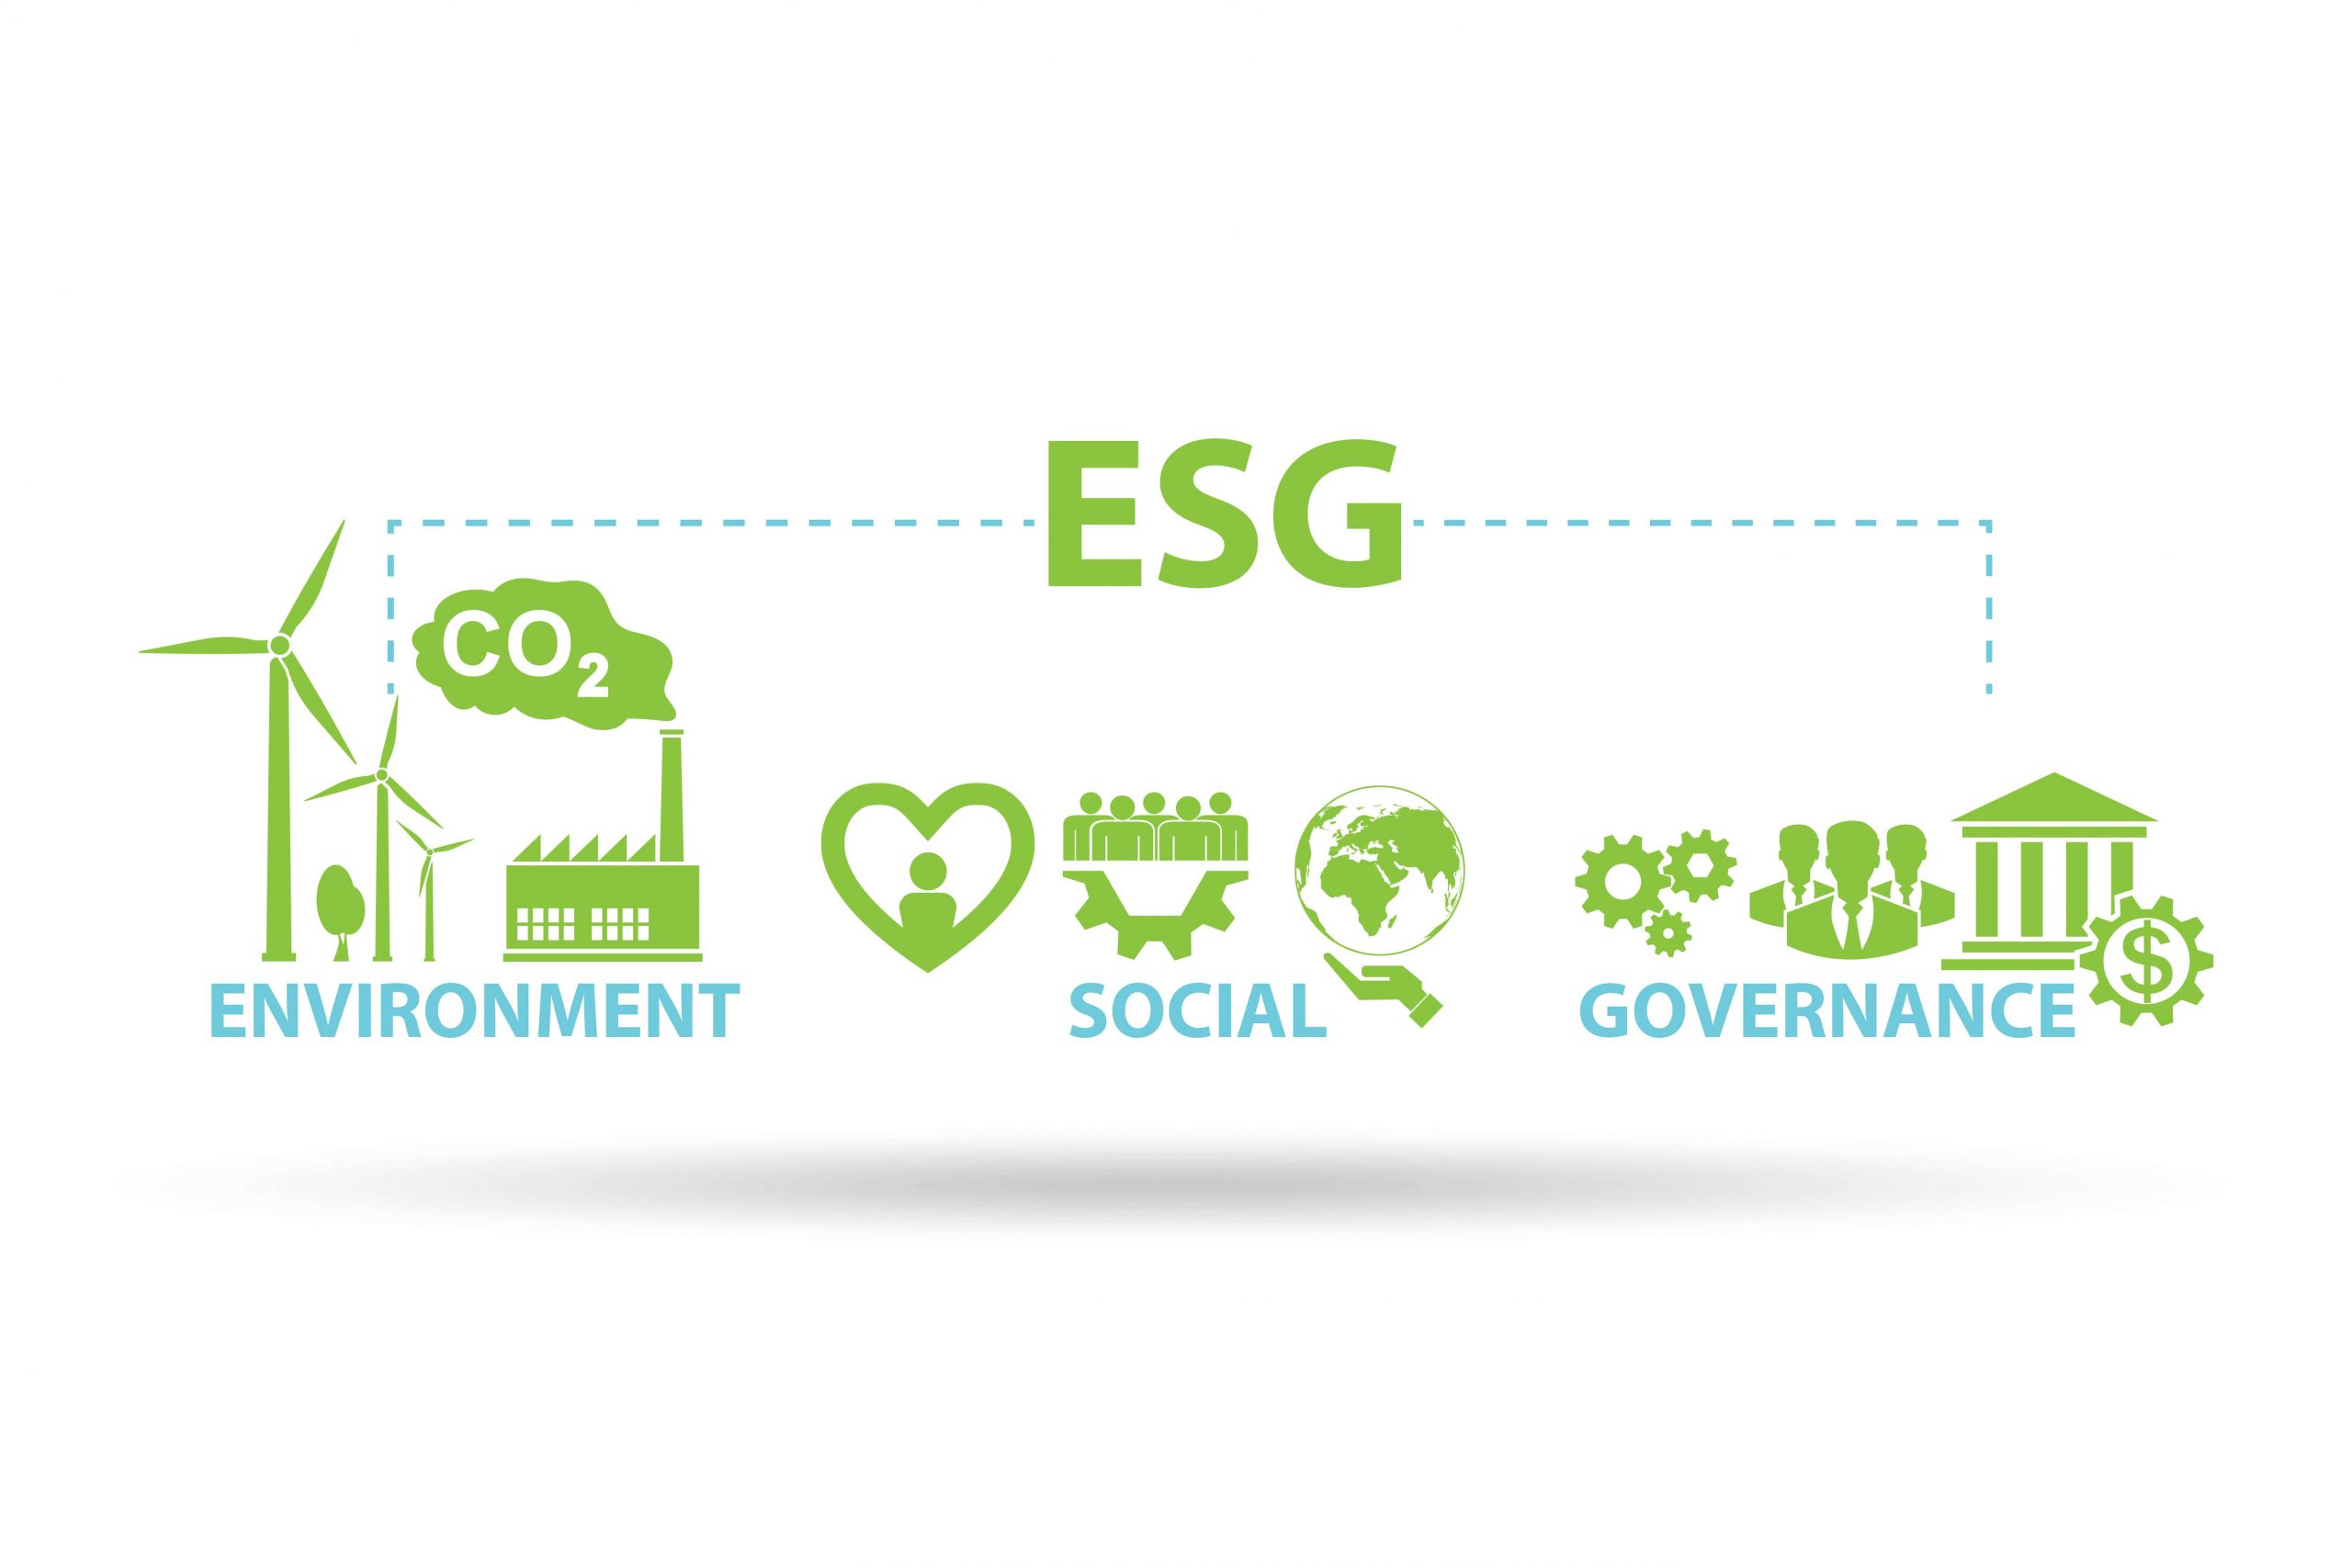 Environment, social, governance principles and missions